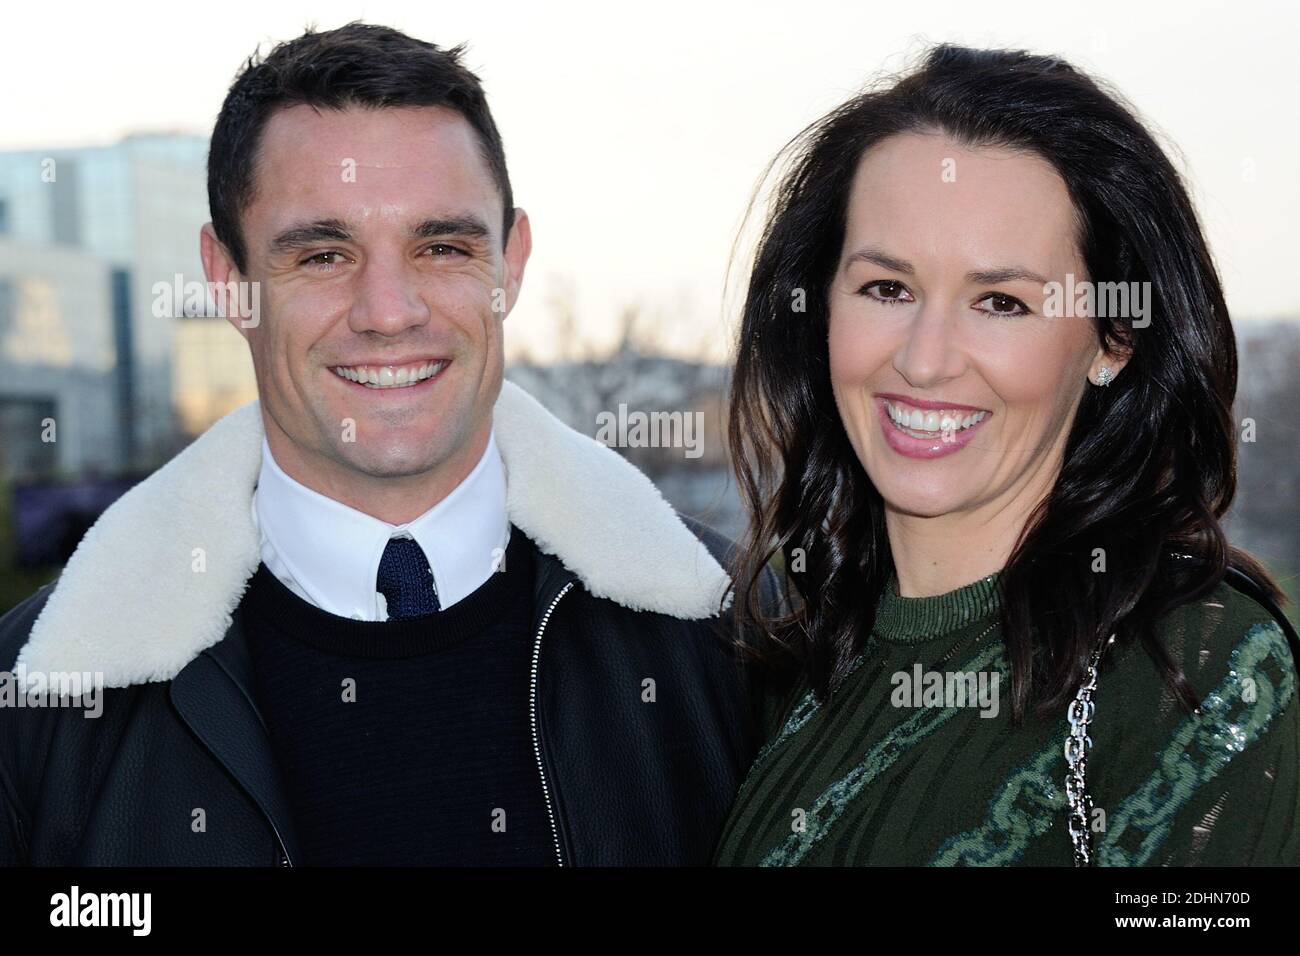 Aussie rugby star Dan Carter and his wife Honor Carter arriving to